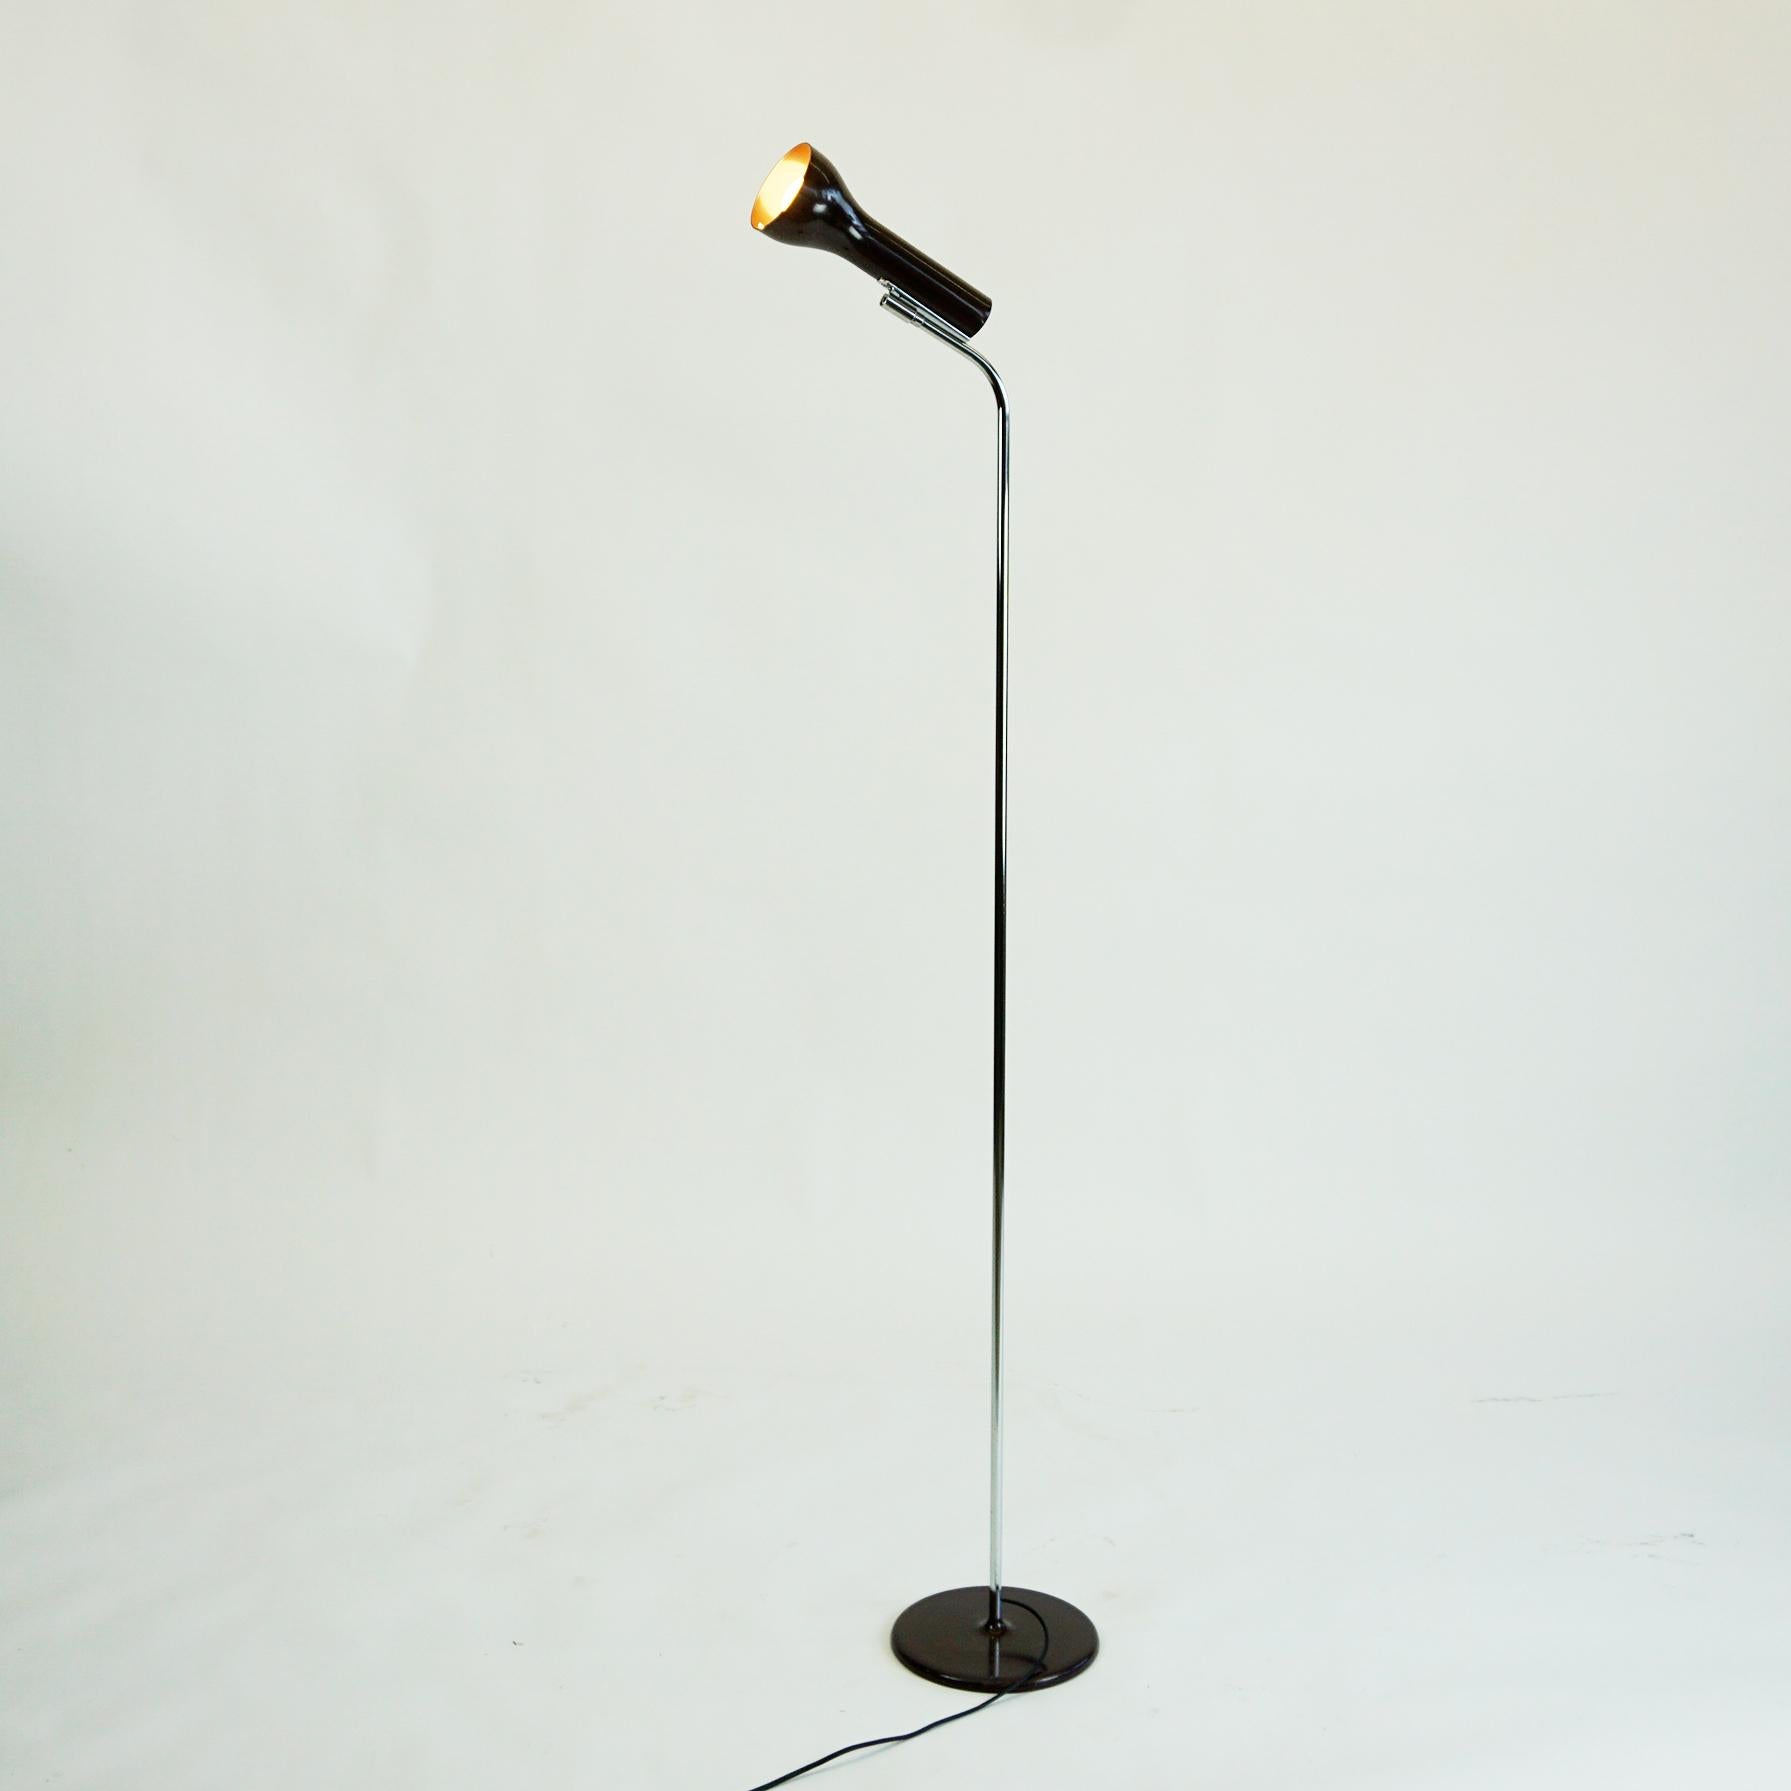 Enameled Chocolate Brown 1960s Chrome Spot Floor Lamp by LAD Team for Swiss Lamps